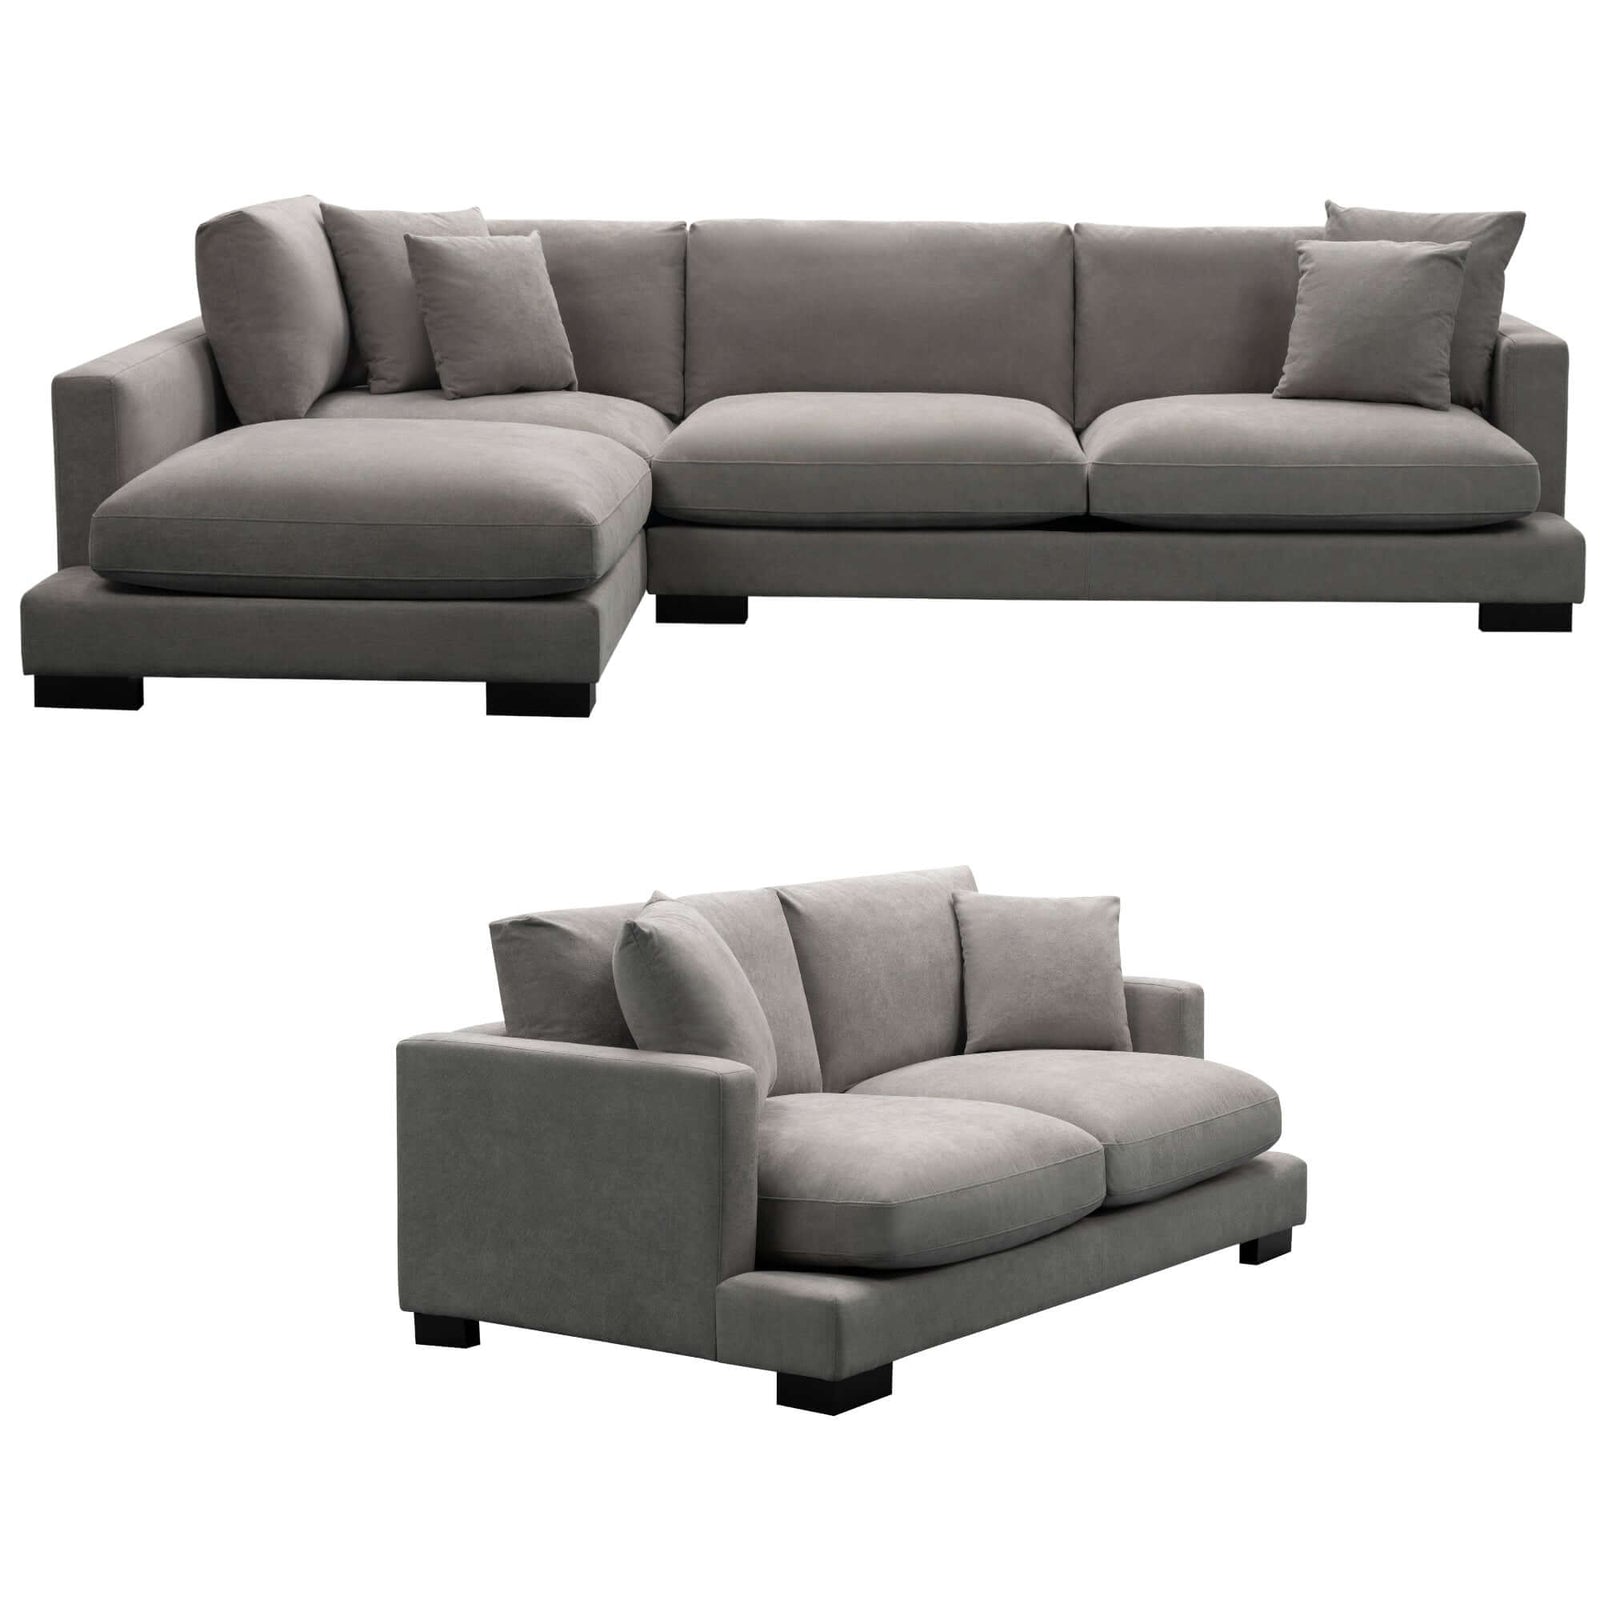 Grey Royalty Sofa Set: 3+2 Seat with Chaise Lounge-Upinteriors